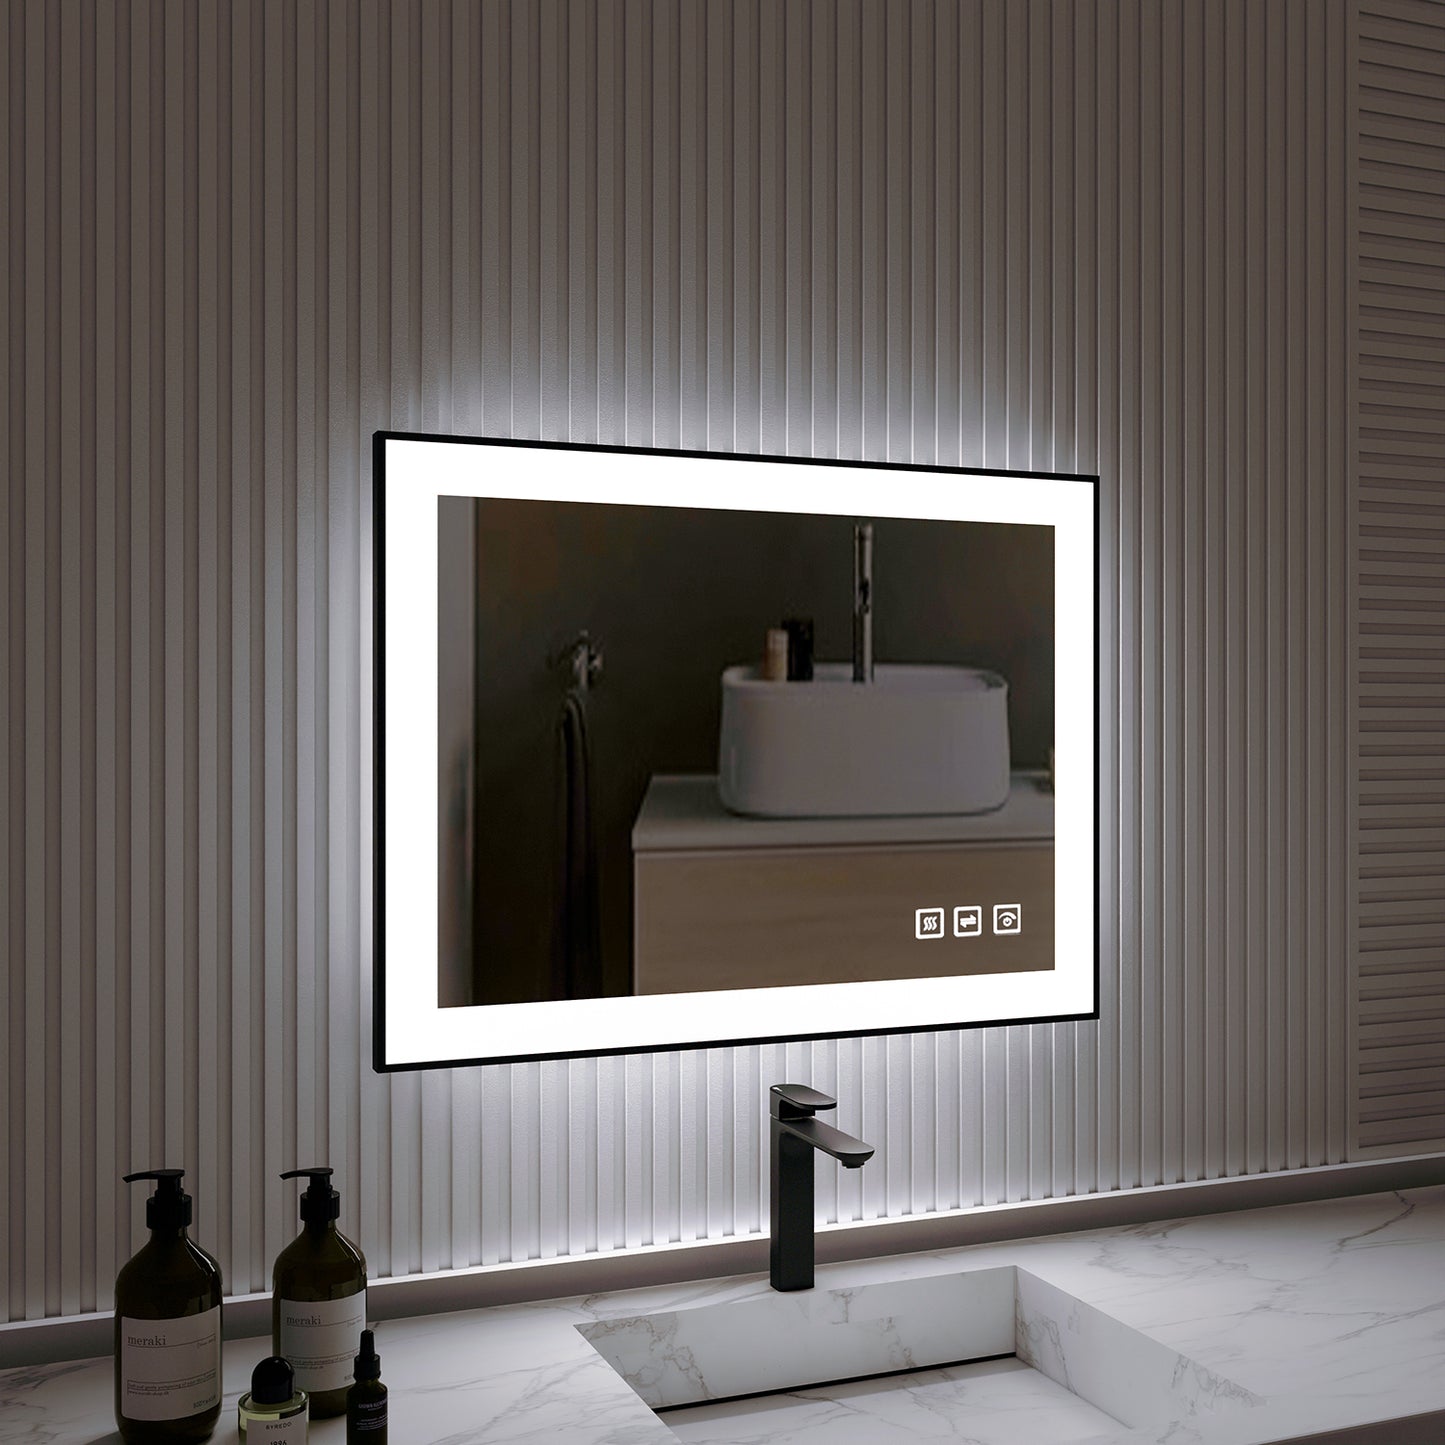 Waterpar® 32 in. W x 24 in. H Rectangular Framed Anti-Fog LED Wall Bathroom Vanity Mirror in Black with Backlit and Front Light